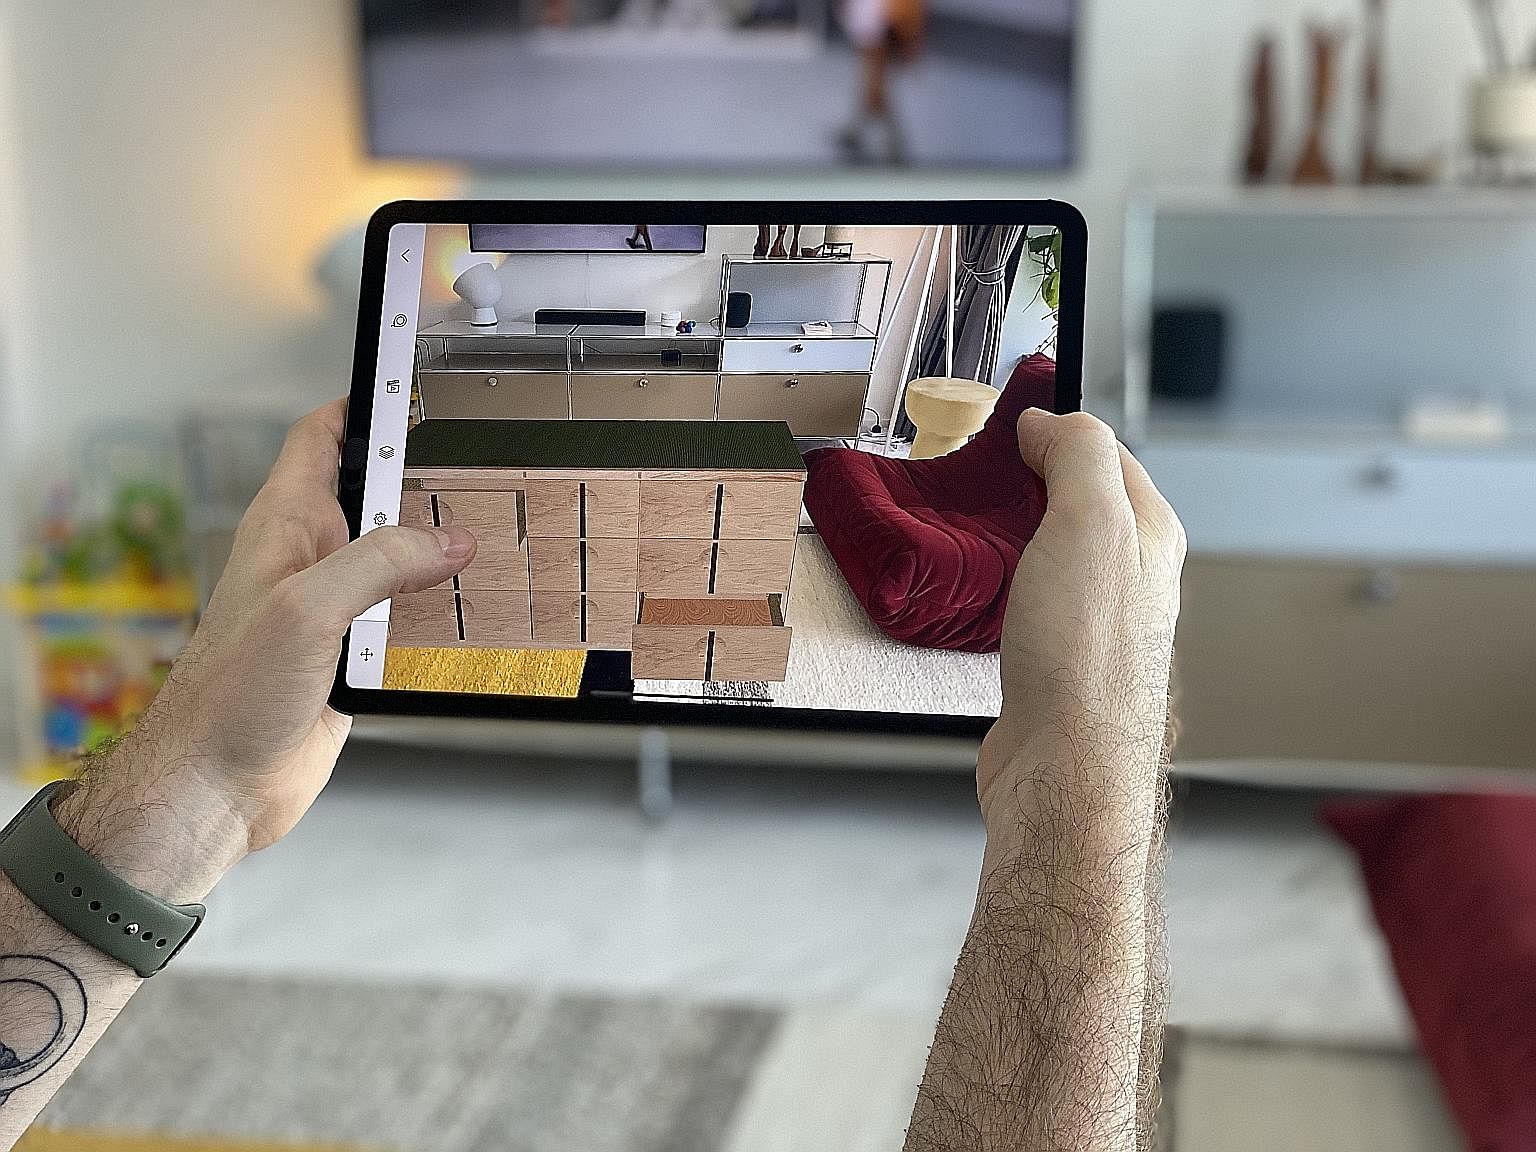 With the SketchUp Viewer app, American designer Jason Schlabach can now virtually "place" furniture in his apartment.